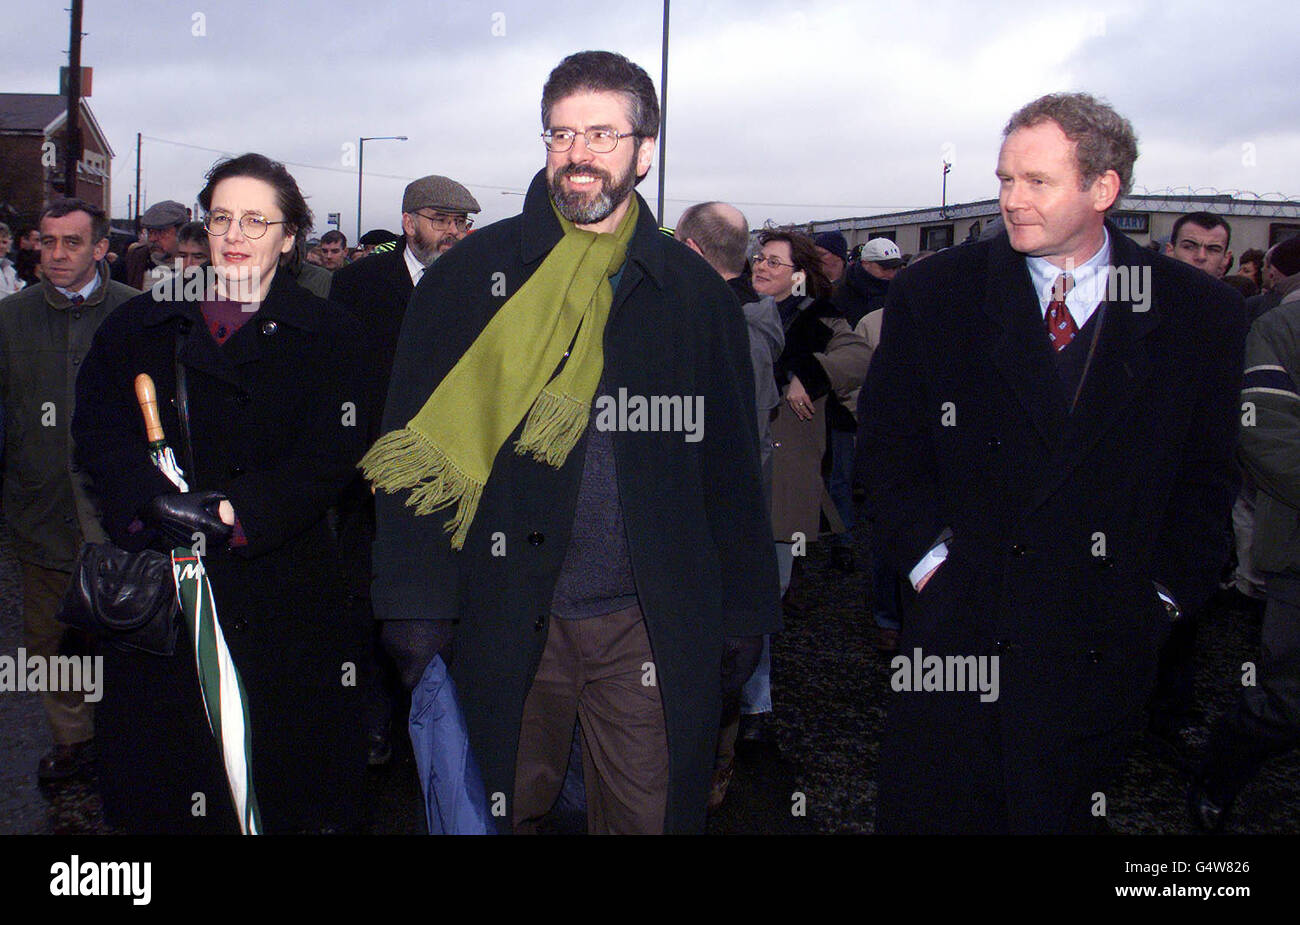 Sinn Fein President Gerry Adams (centre), with his Sinn Fein Ministers Bairbre De Bruin and Martin McGuinness (R) at the Bloody Sunday rally in Londonderry, in memory of the 14 people who were shot dead by British paratroopers in the city in 1972. Stock Photo